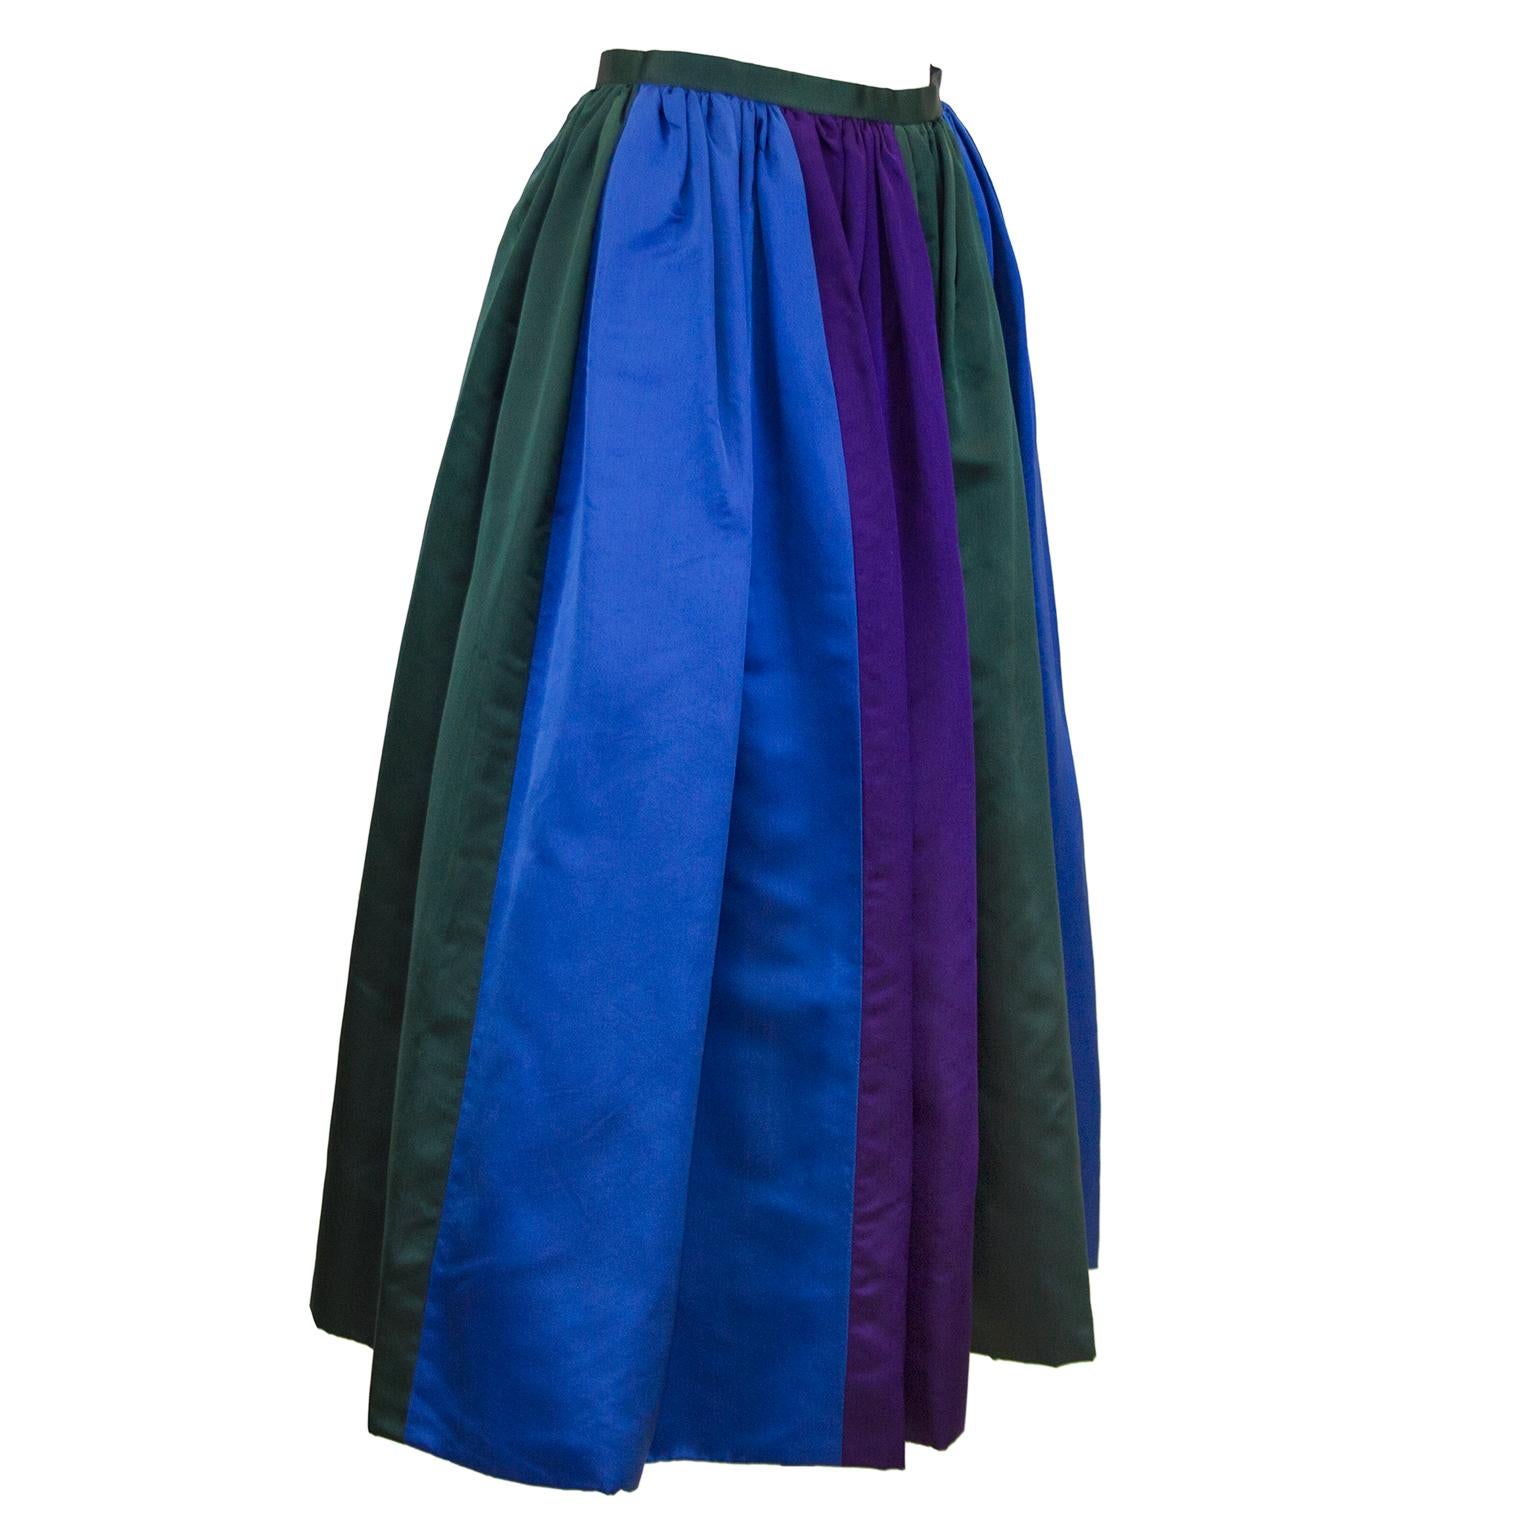 Designer unknown 1960's duchesse satin color block evening skirt in royal blue, hunter green and deep purple. Not quite floor length, fits average height woman lower calf to just above the ankle. In excellent condition, there is a label in the